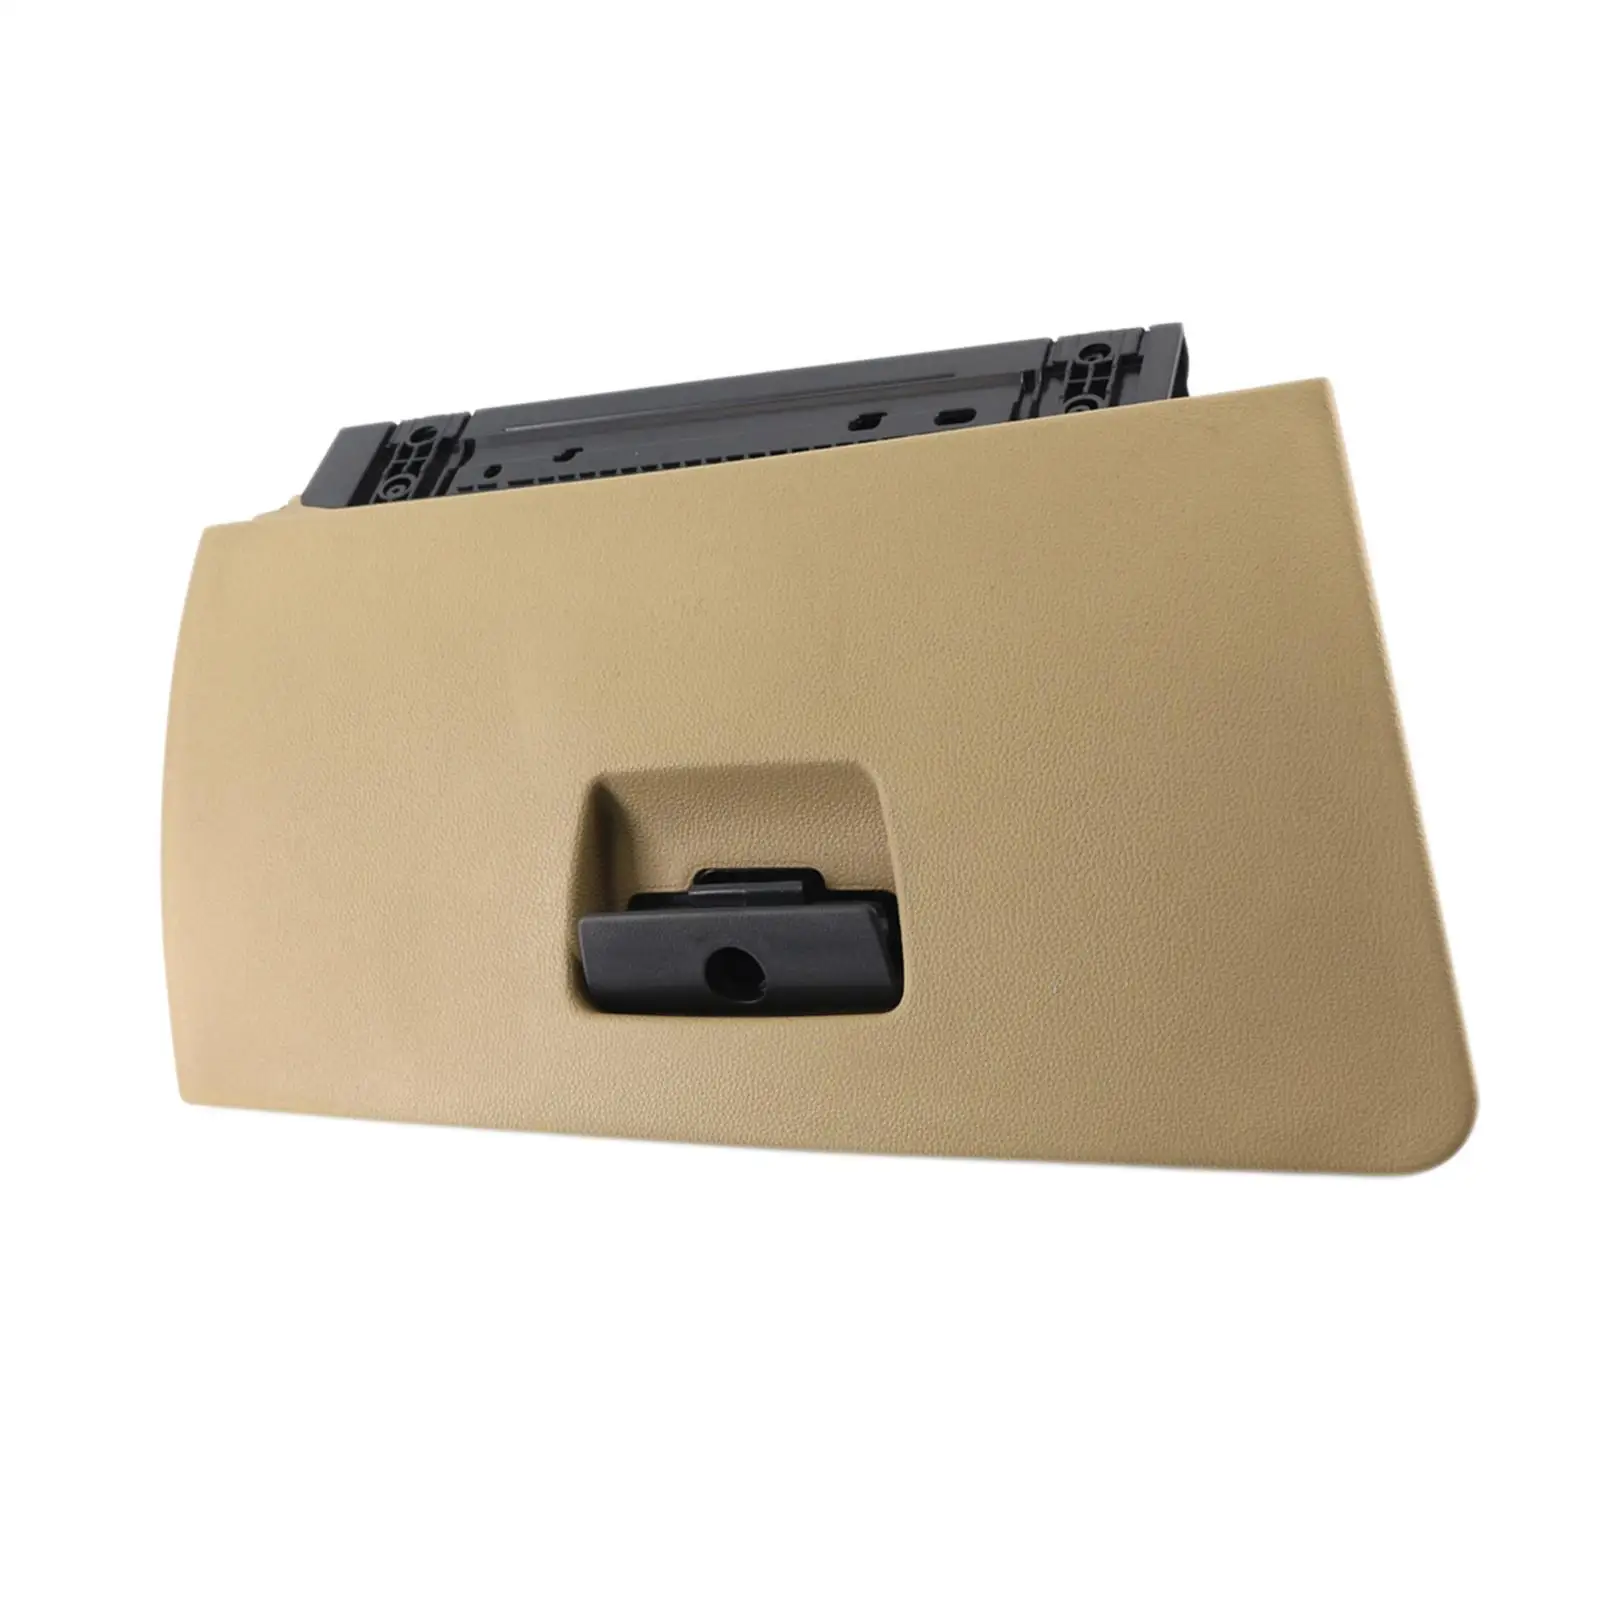 Glovebox Replacement Accessory Easy to Install Premium Practical Glove Box Storage Compartment for BMW E90 D91 E92 06-13